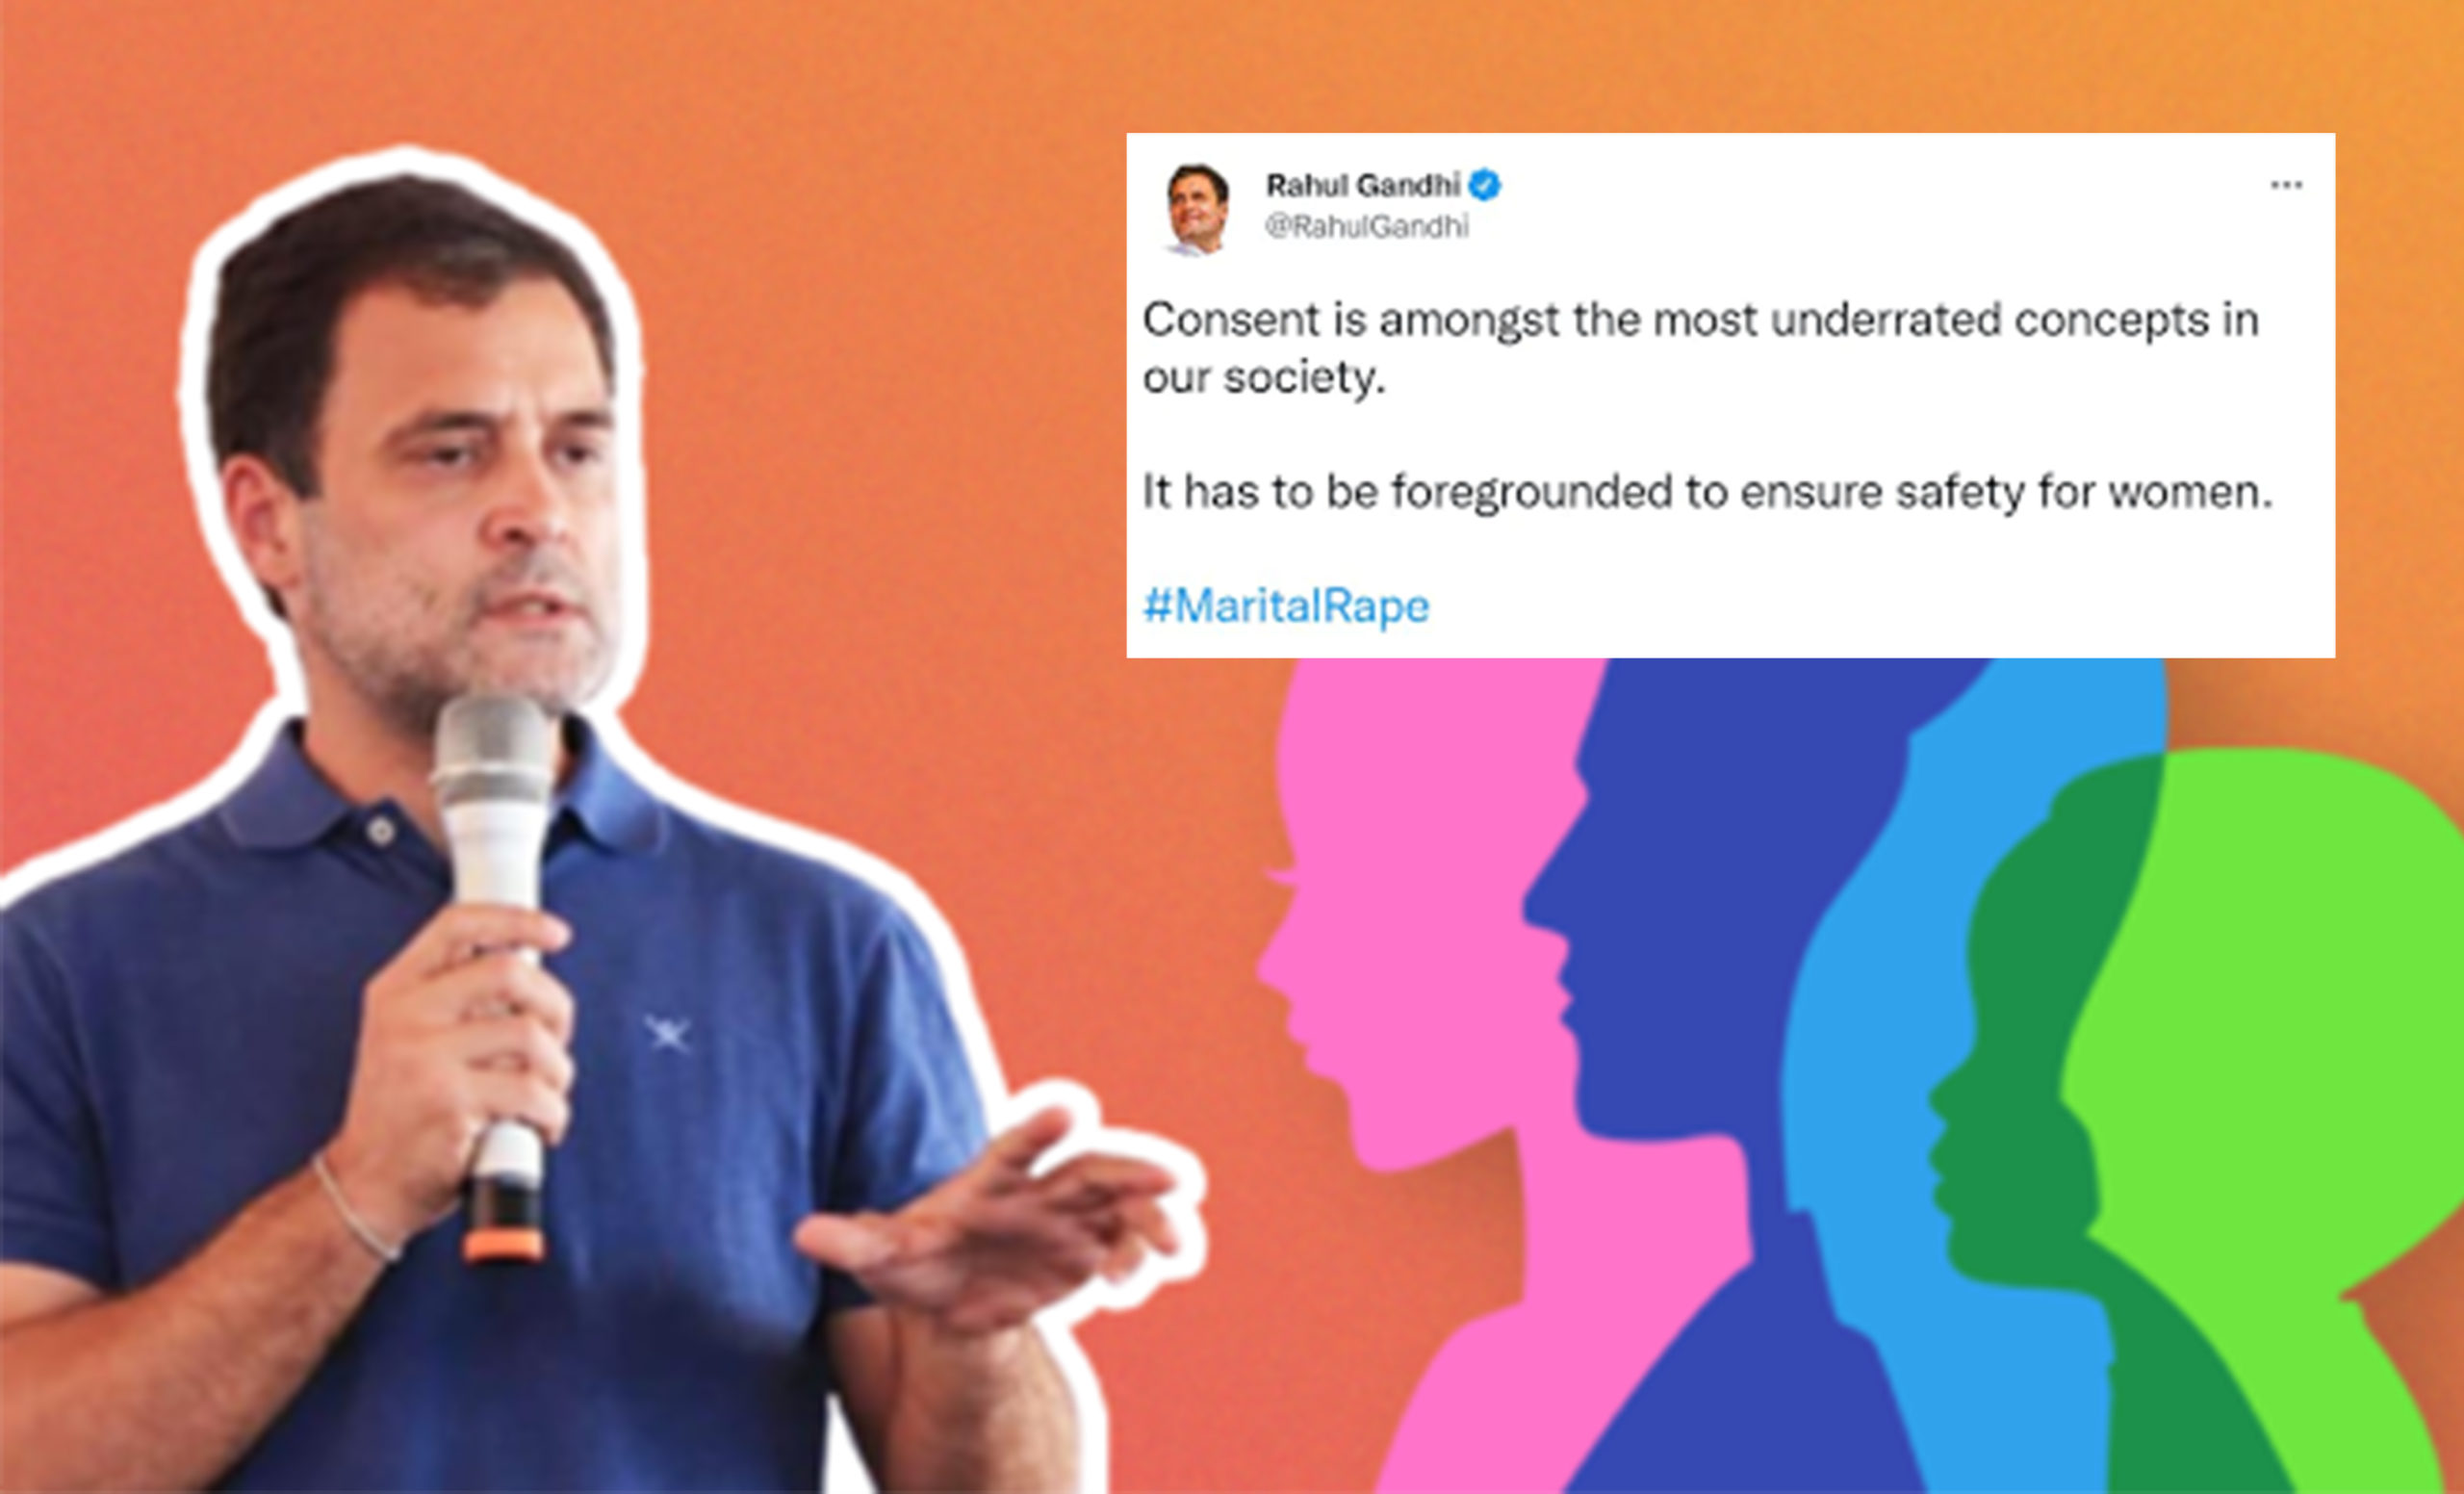 Rahul Gandhi Talks About ‘Consent’ And ‘Women’s Safety’ Amid The Hearings At Delhi High Court To Criminalise Marital Rape